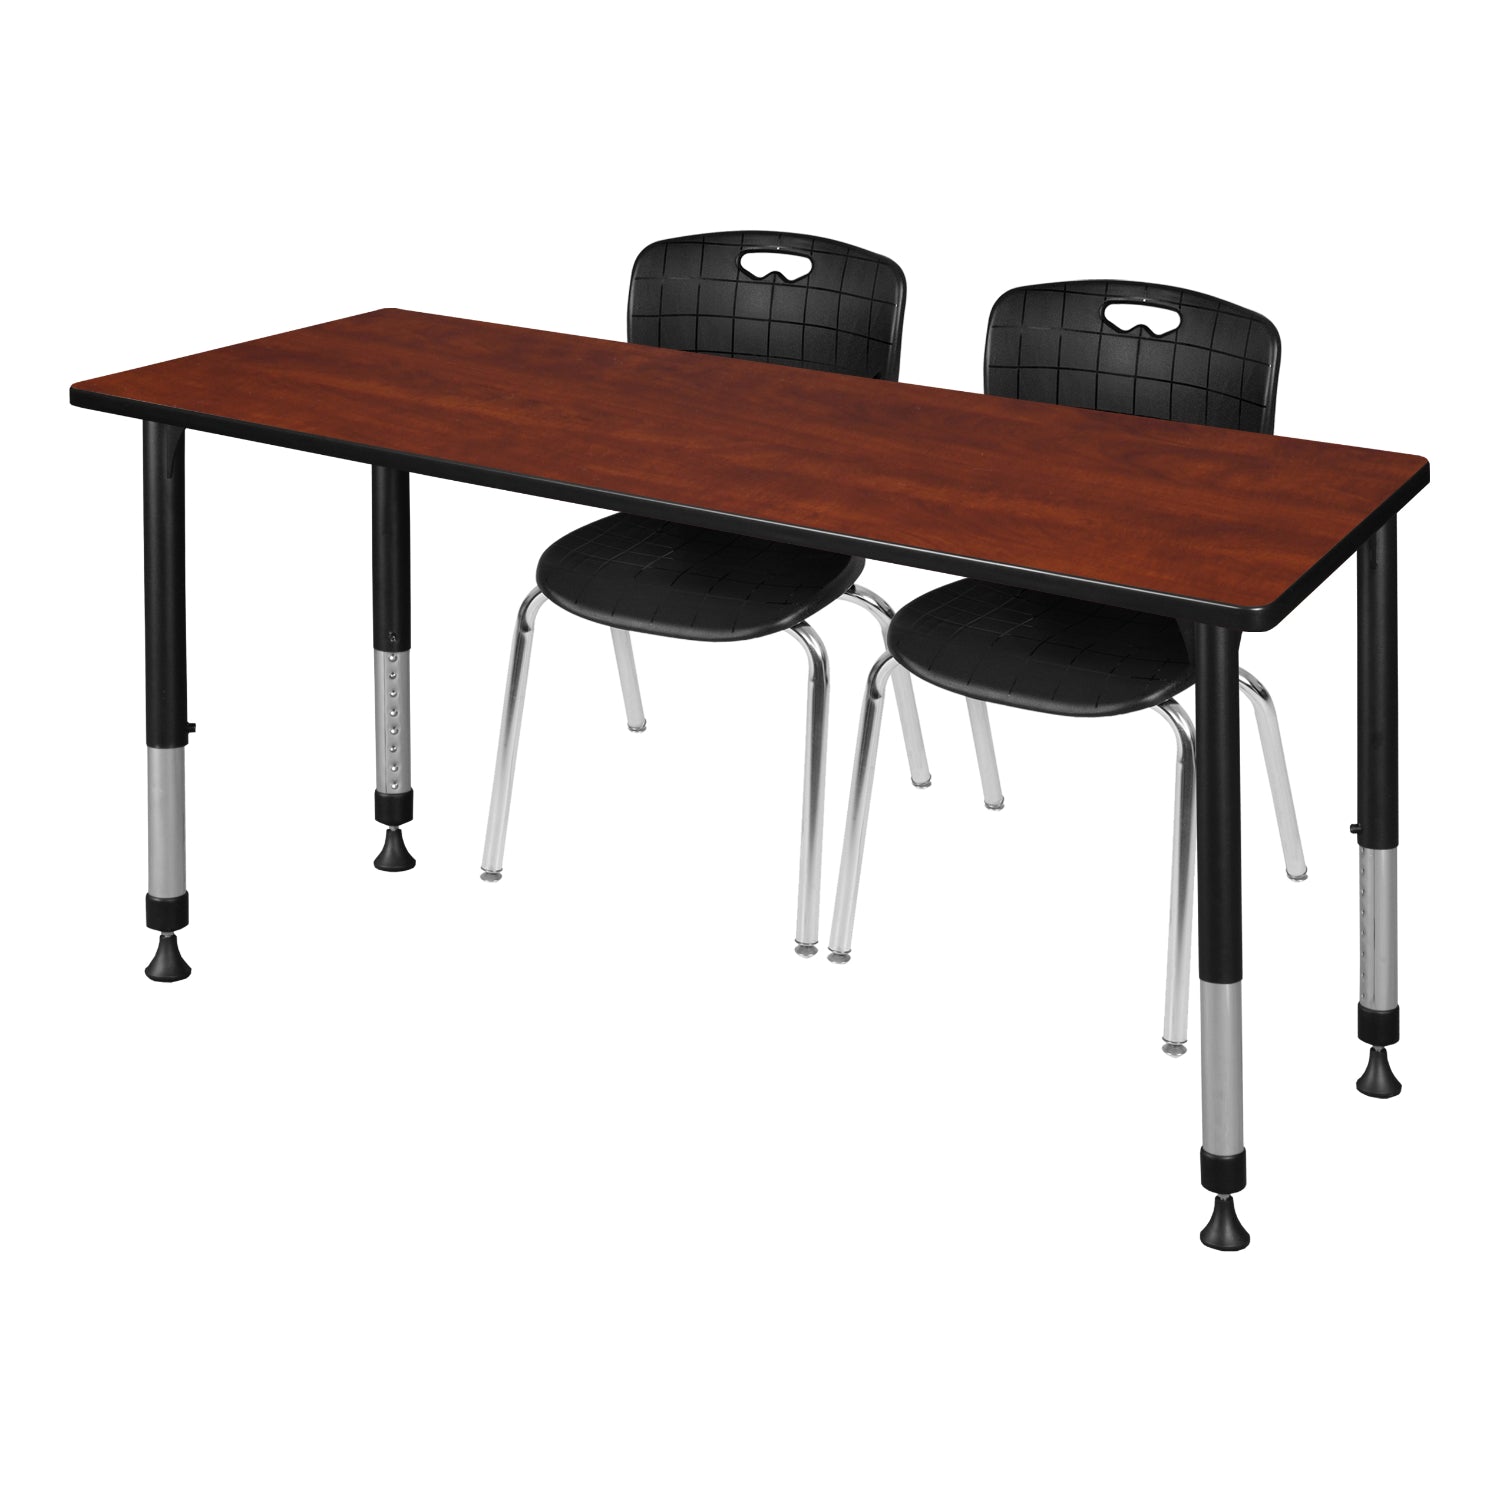 Kee Classroom Table and Chair Package, Kee 60" x 30" Rectangular Adjustable Height Table with 2 Andy 18" Stack Chairs